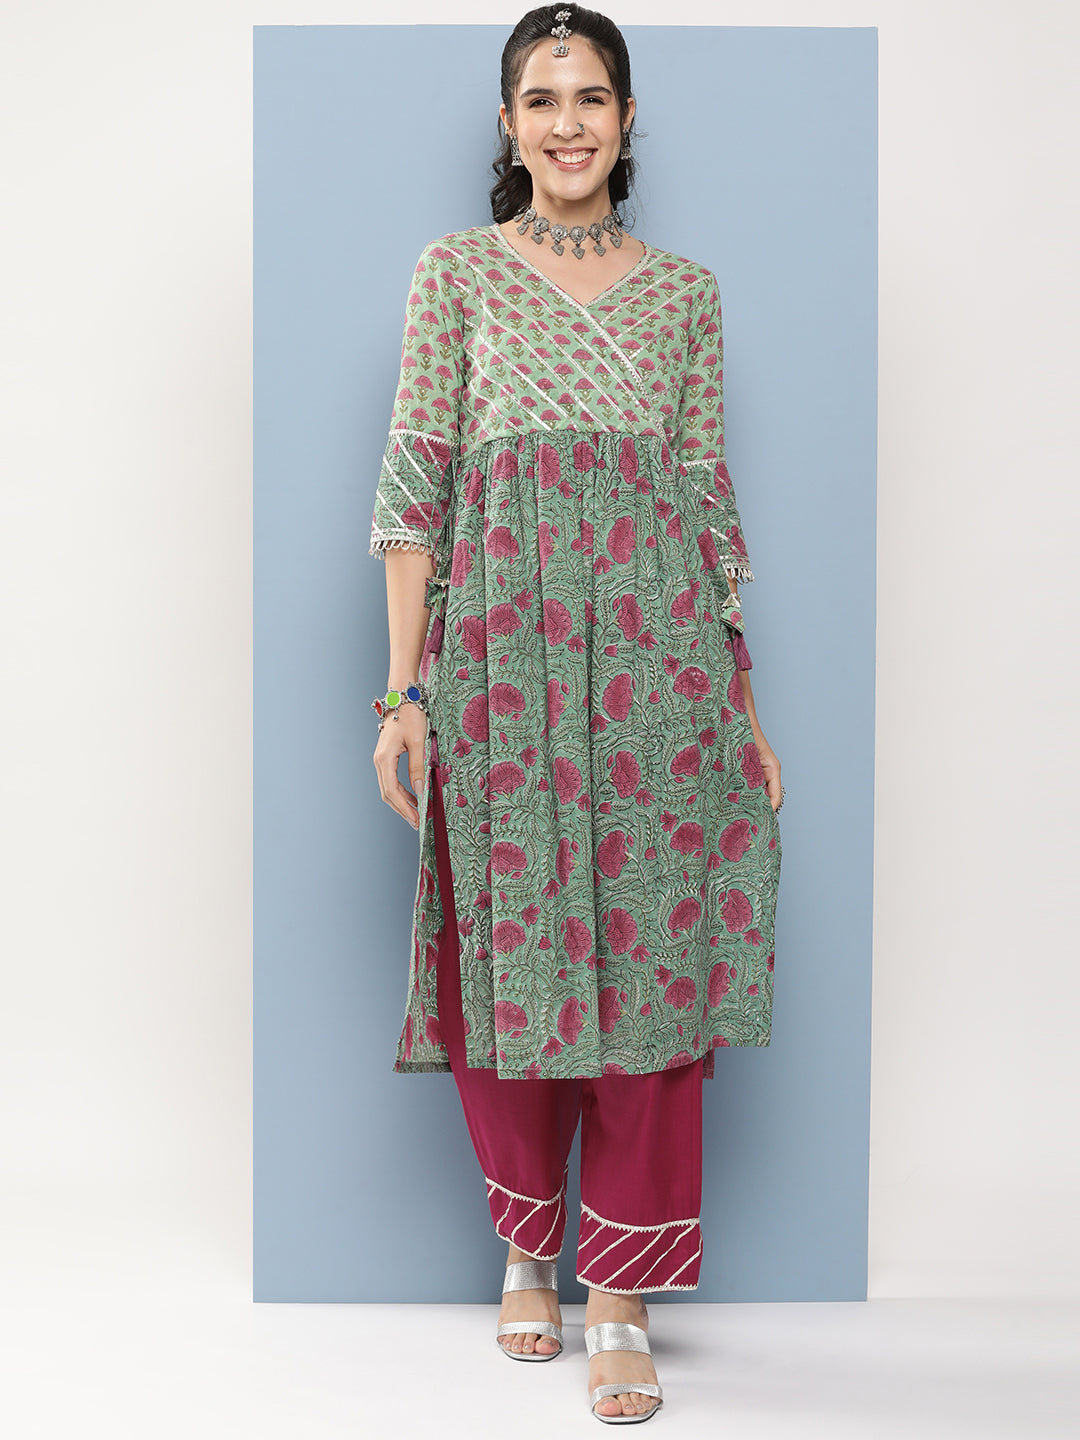 Women's Olive Green Floral Print High-Slit Kurta With Gotta Patti Details With Pink Solid Palazzos - Bhama Couture